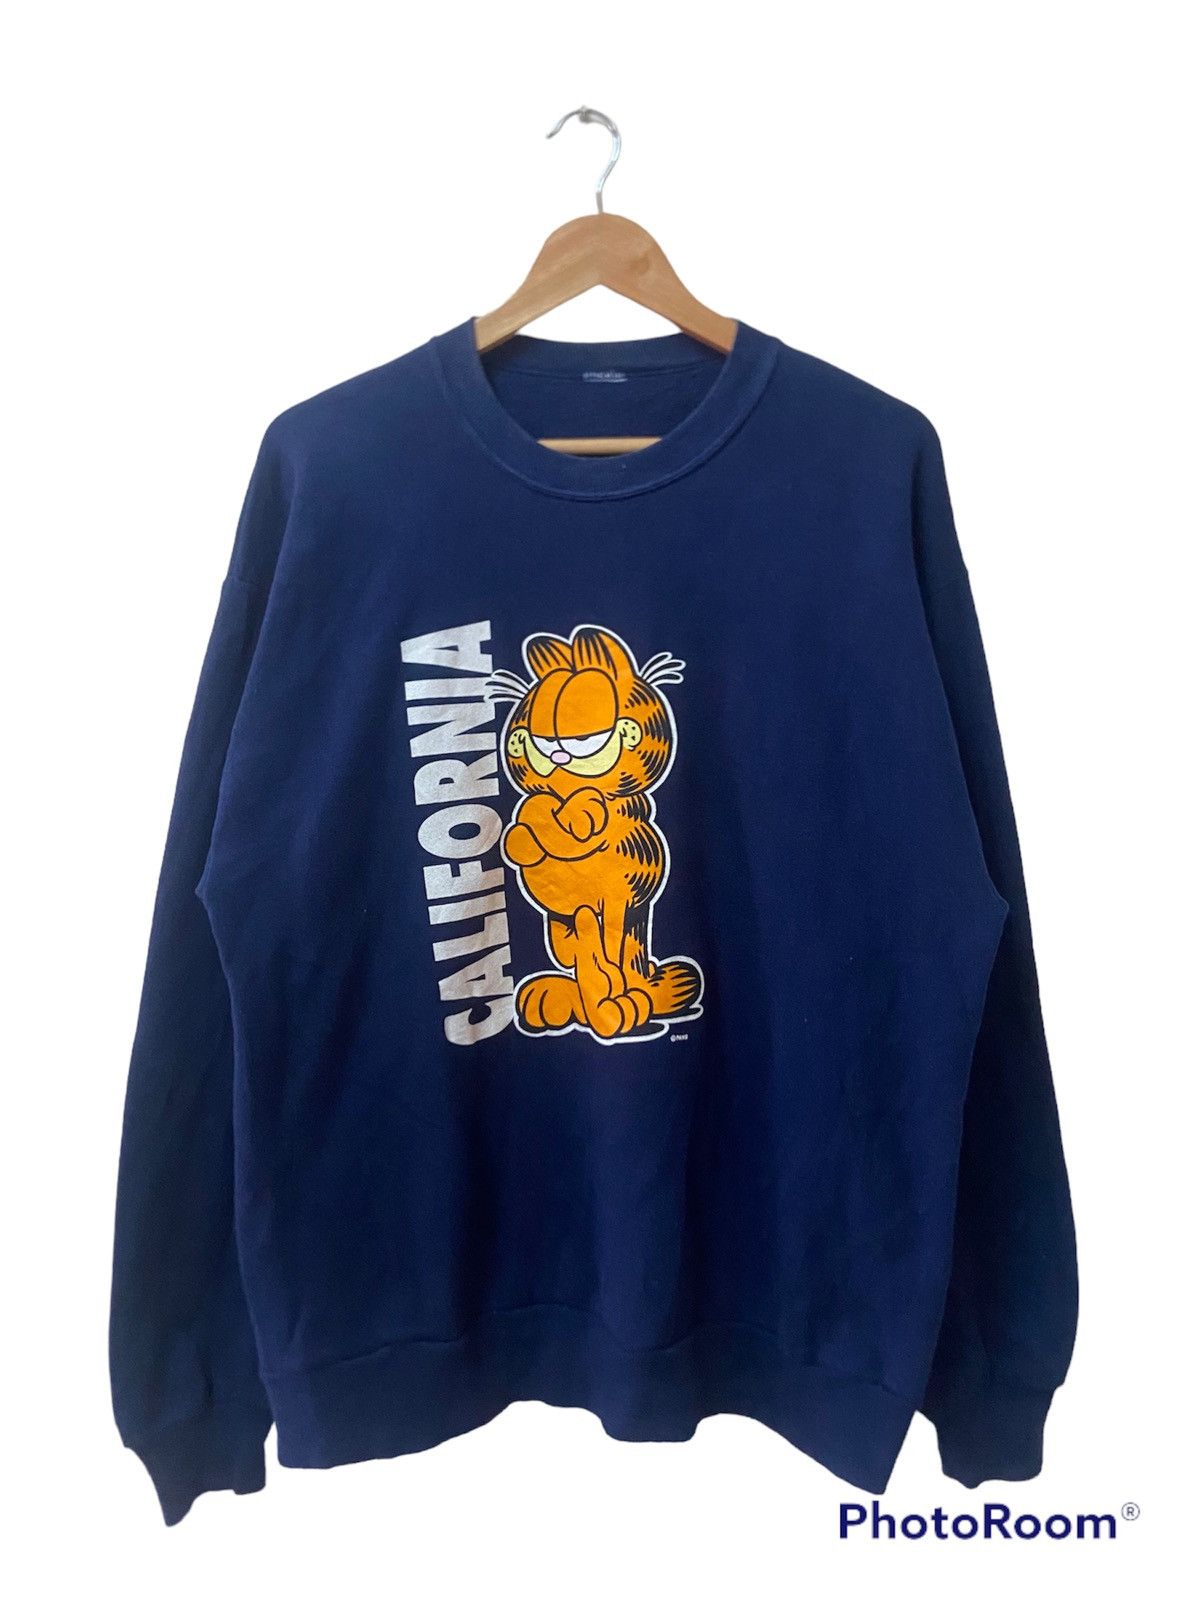 Rare Vintage Garfield 70's Sweatshirt Crewneck Pullover 1978 Spell Out  Coffee Me